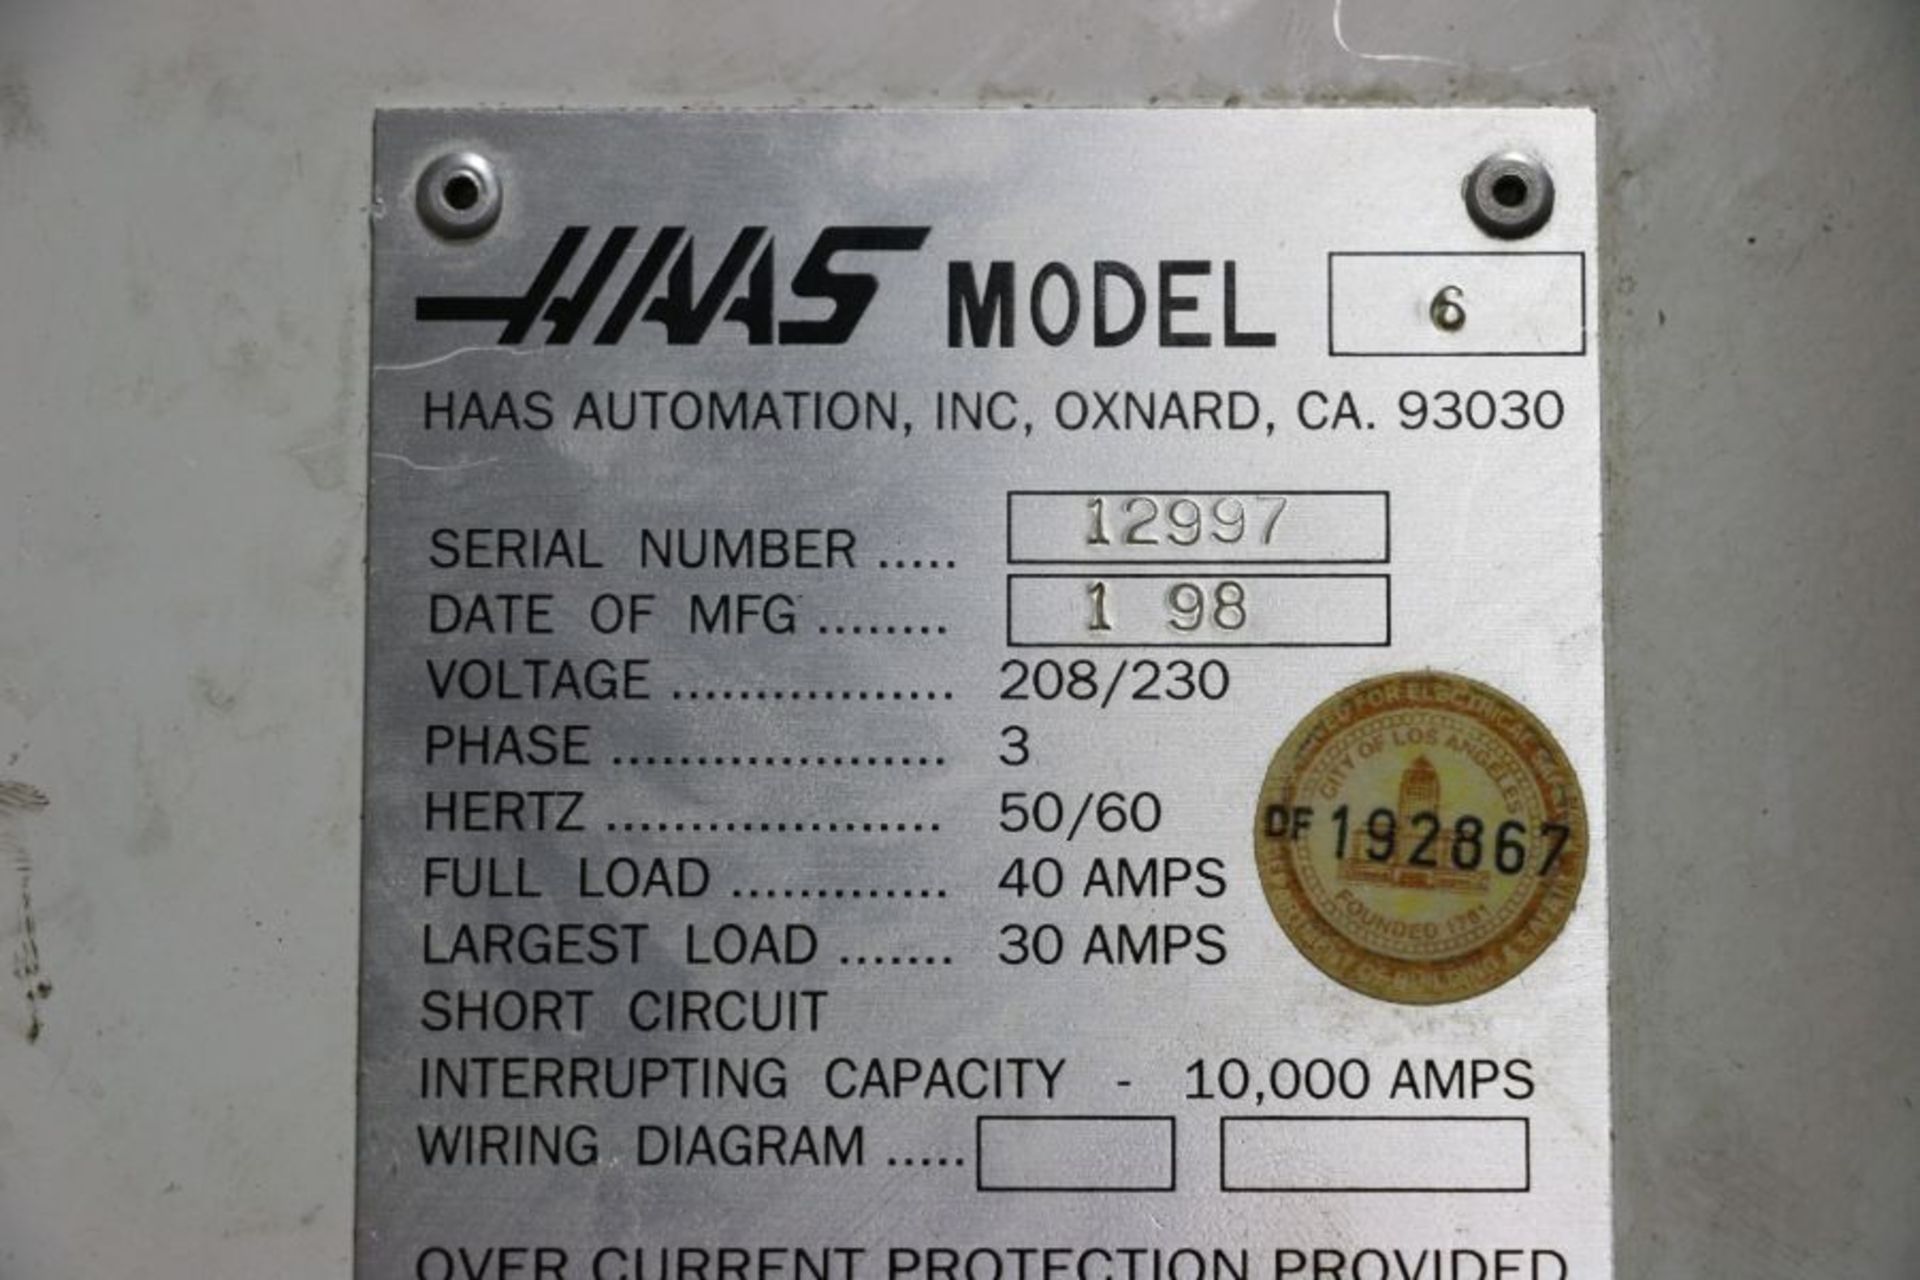 Haas VF-6, 64” x 32” x 30” Travels, 20 Position Tool Carousel, CTS, CT-40 Taper, s/n 12997, New 1998 - Image 12 of 12